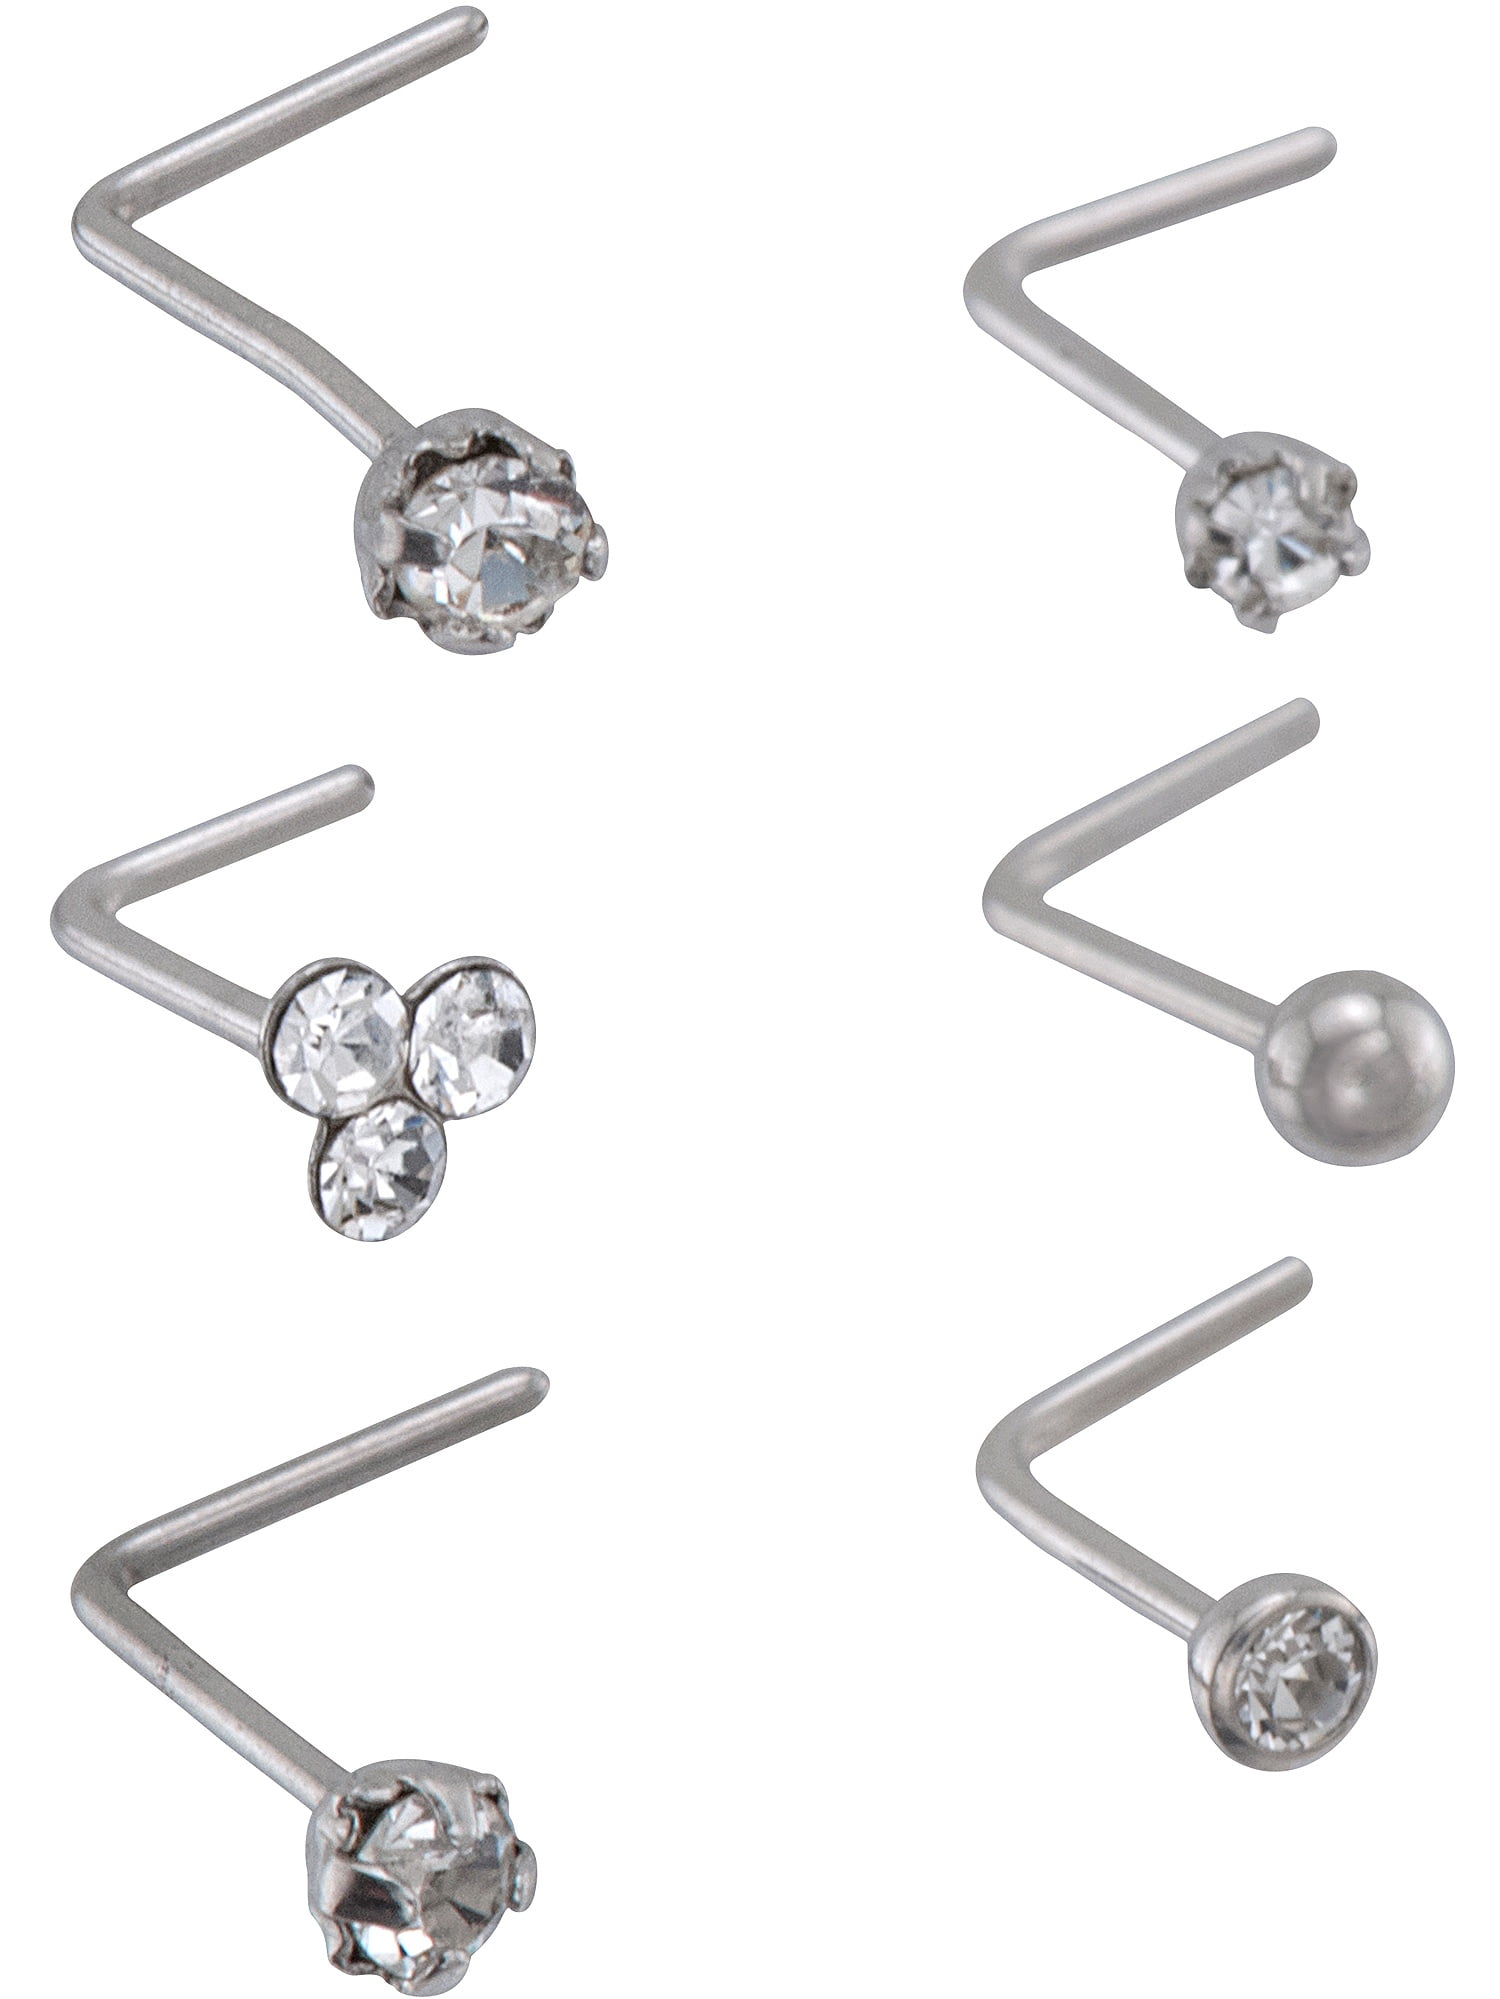 Body Jewelry L Shaped Nose Stud Value Pack Clear Walmart Com